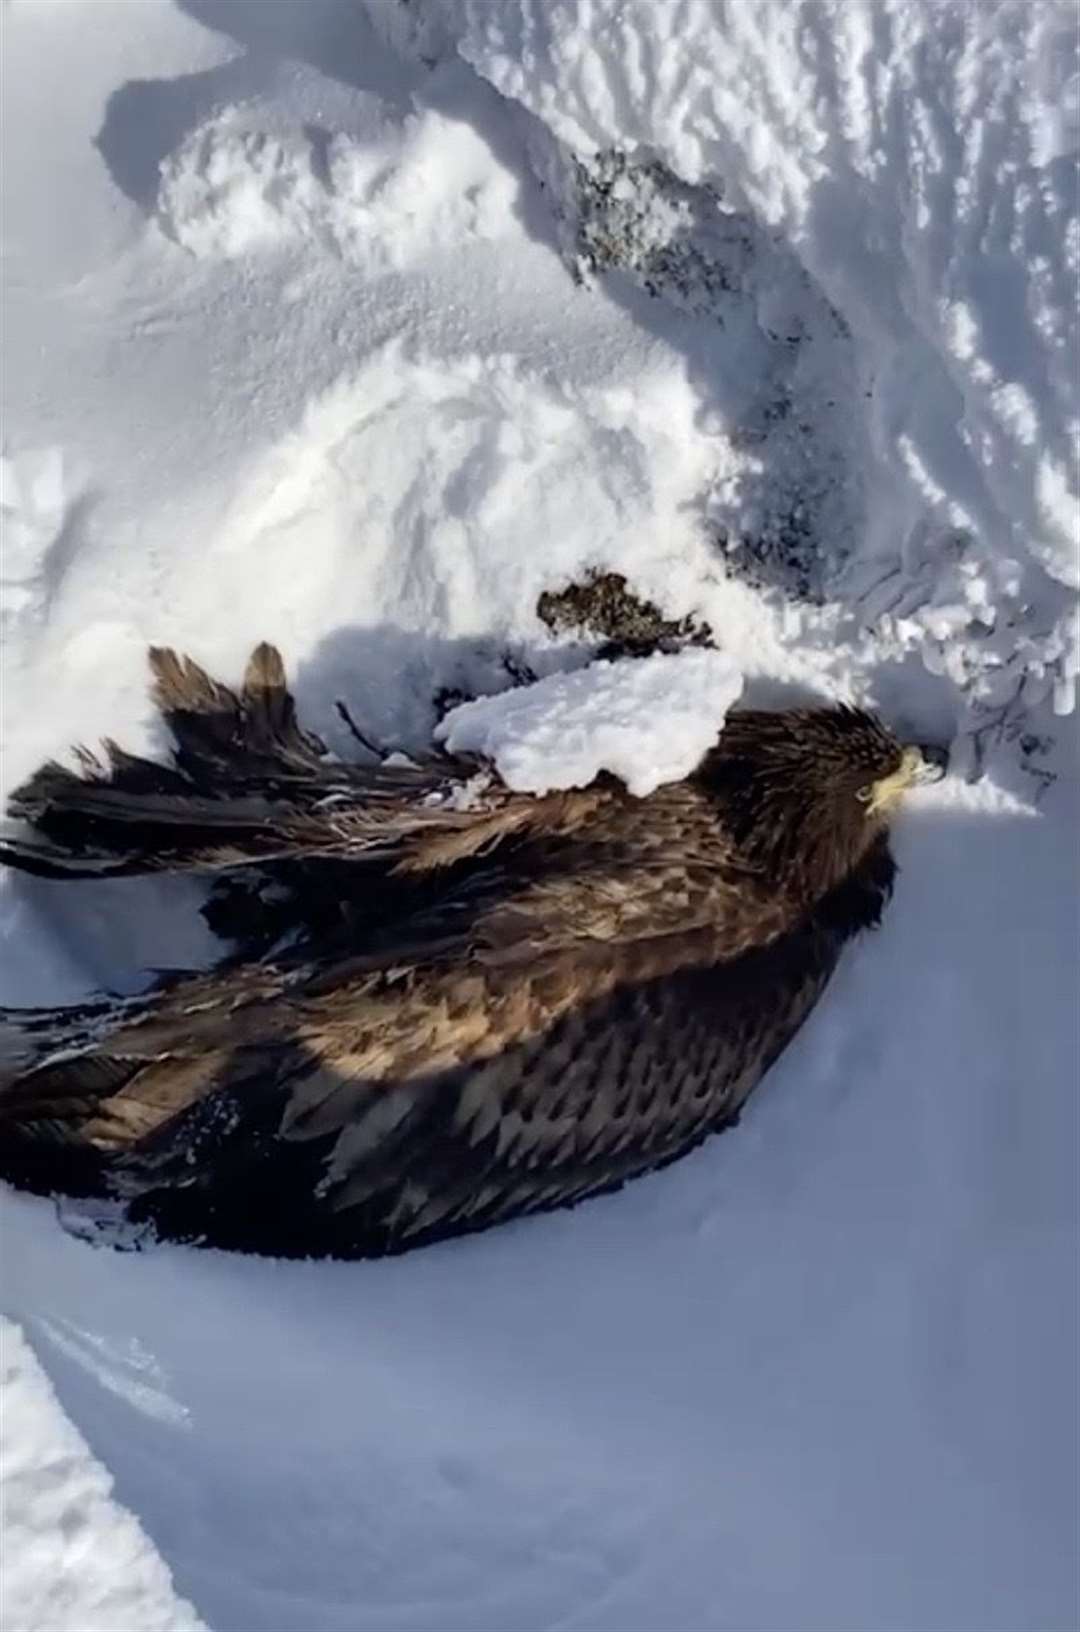 The injured eagle in the snow.